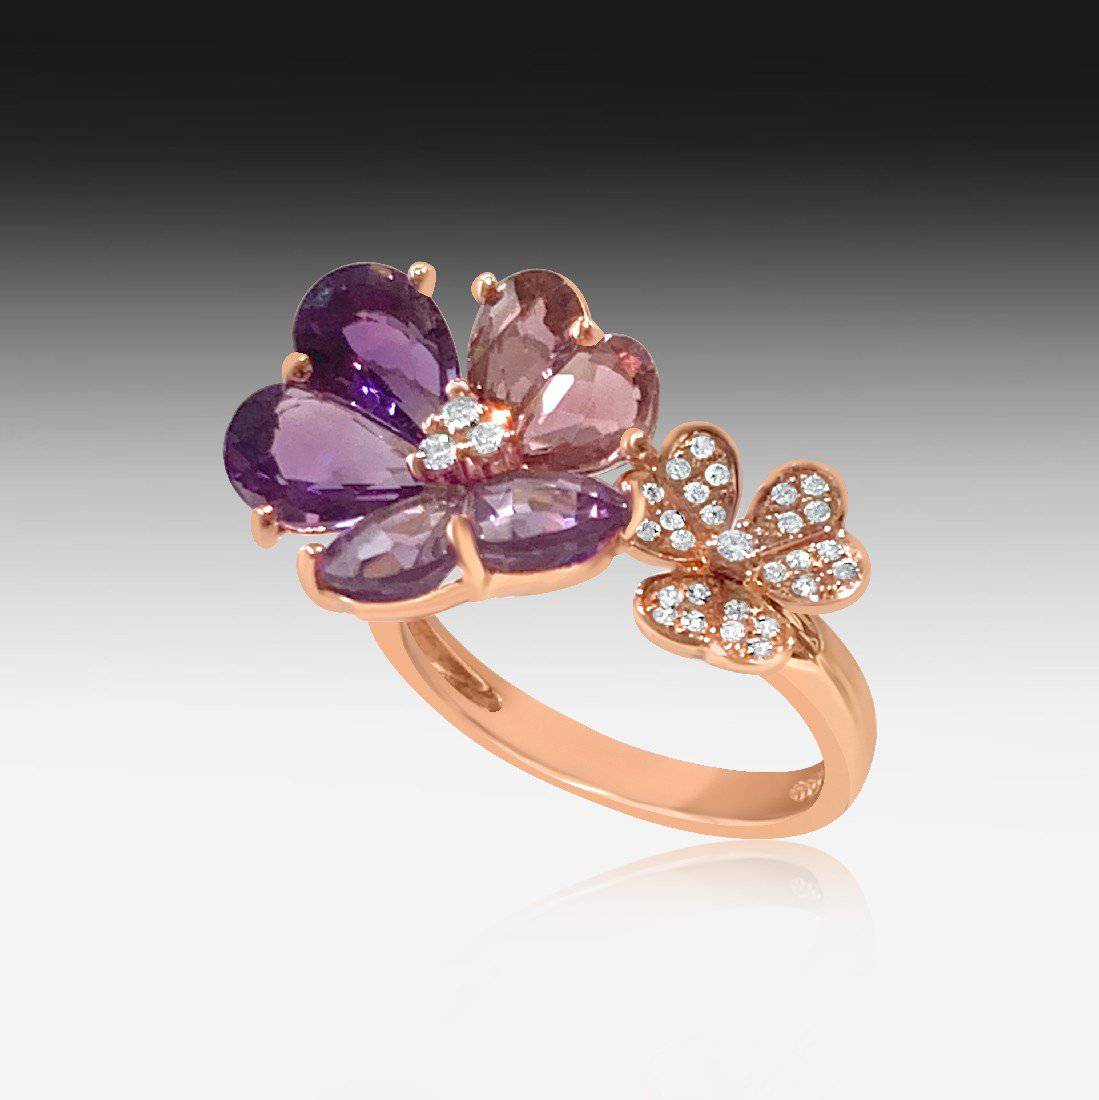 18kt Rose Gold floral design ring with Diamonds, Amehtyst and Pink Tourmaline - Masterpiece Jewellery Opal & Gems Sydney Australia | Online Shop